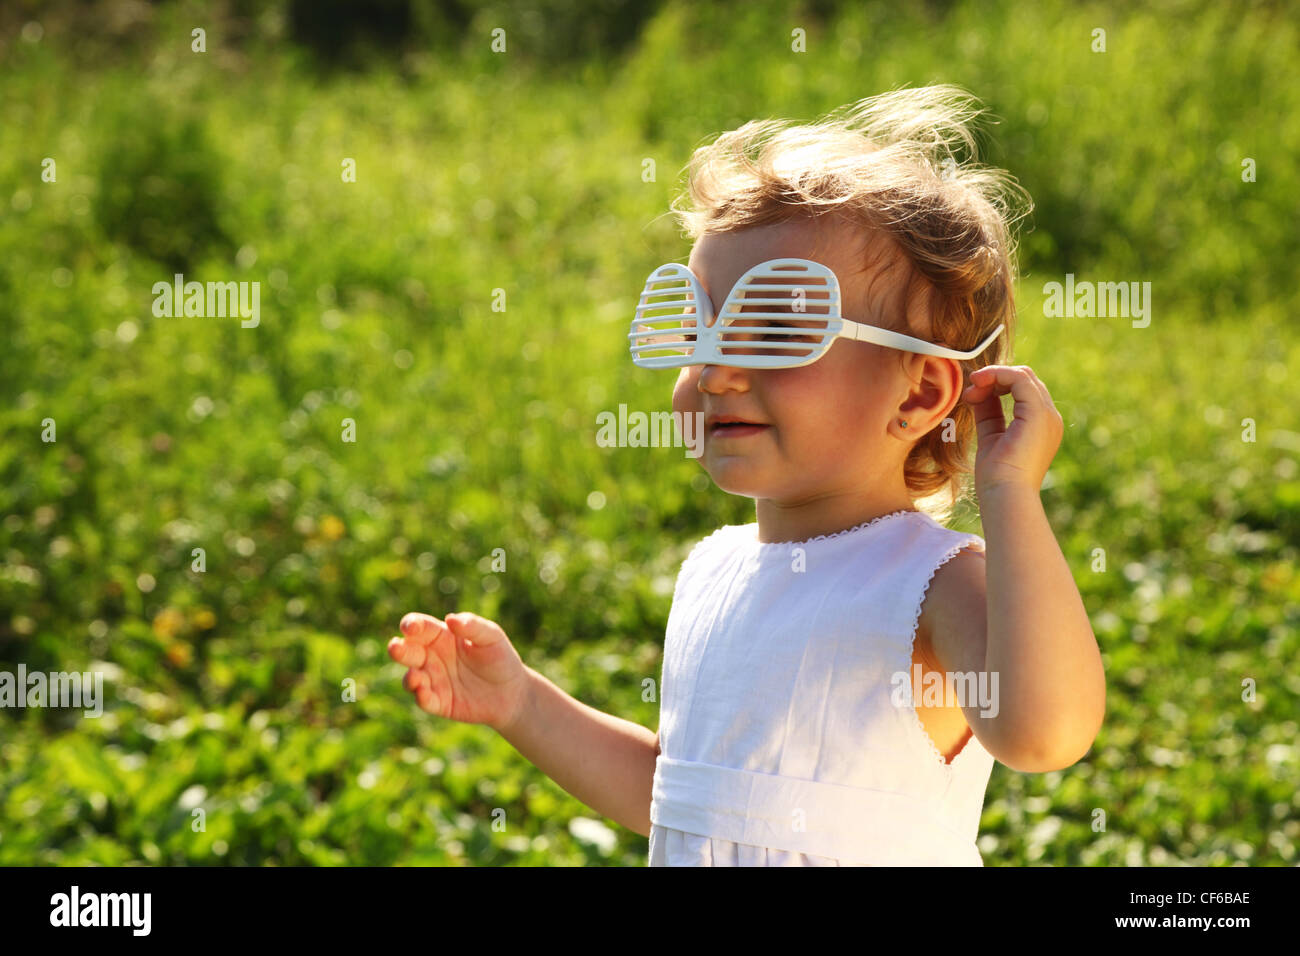 The little girl in the blinds-glasses worn upside down Stock Photo